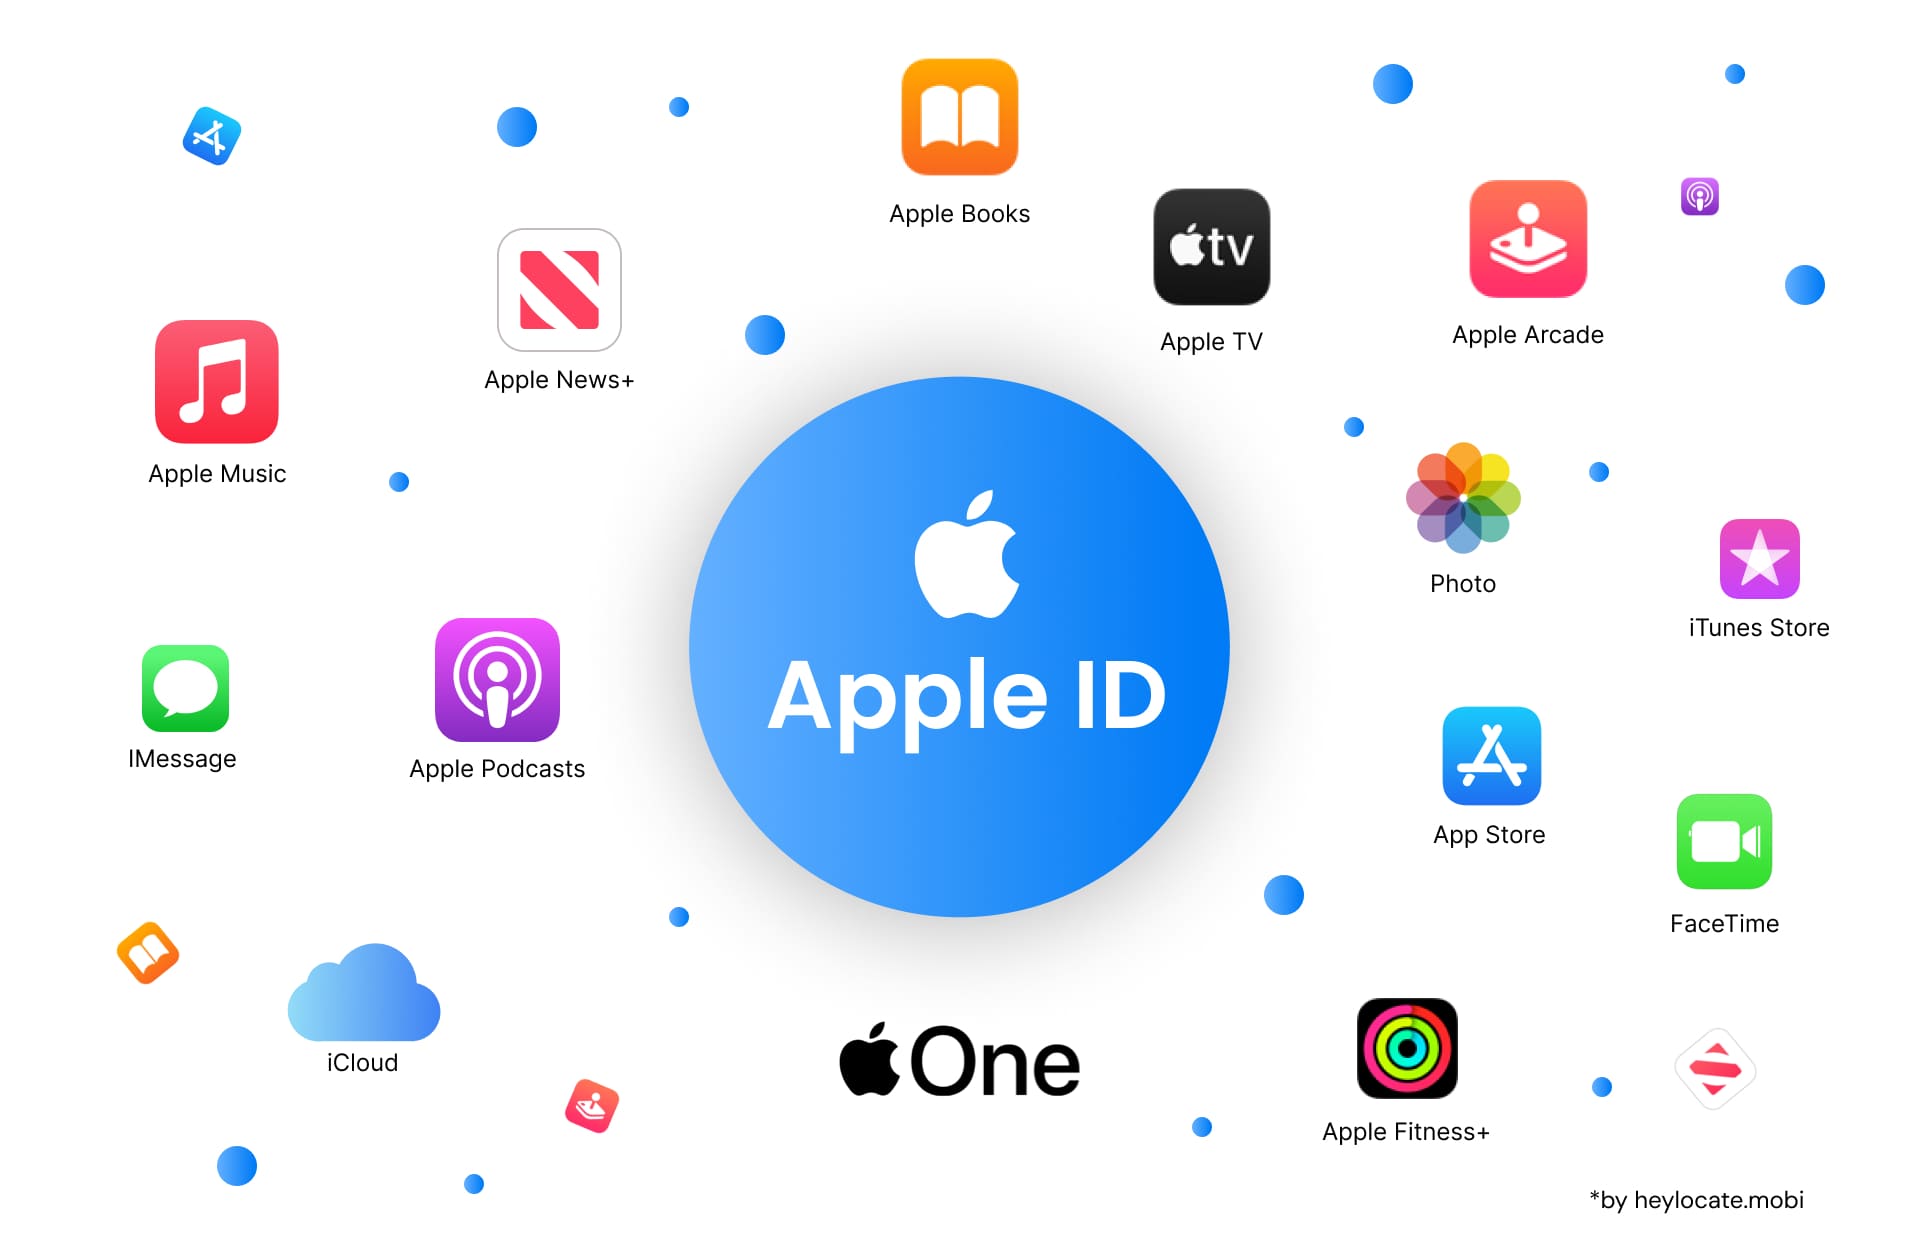 Graphic representation of an Apple ID surrounded by various Apple service icons such as Apple Music, Apple News+, Apple TV, Apple Books, Apple Arcade, Photo, iTunes Store, iMessage, Apple Podcasts, iCloud, App Store, FaceTime, Apple One, and Apple Fitness+